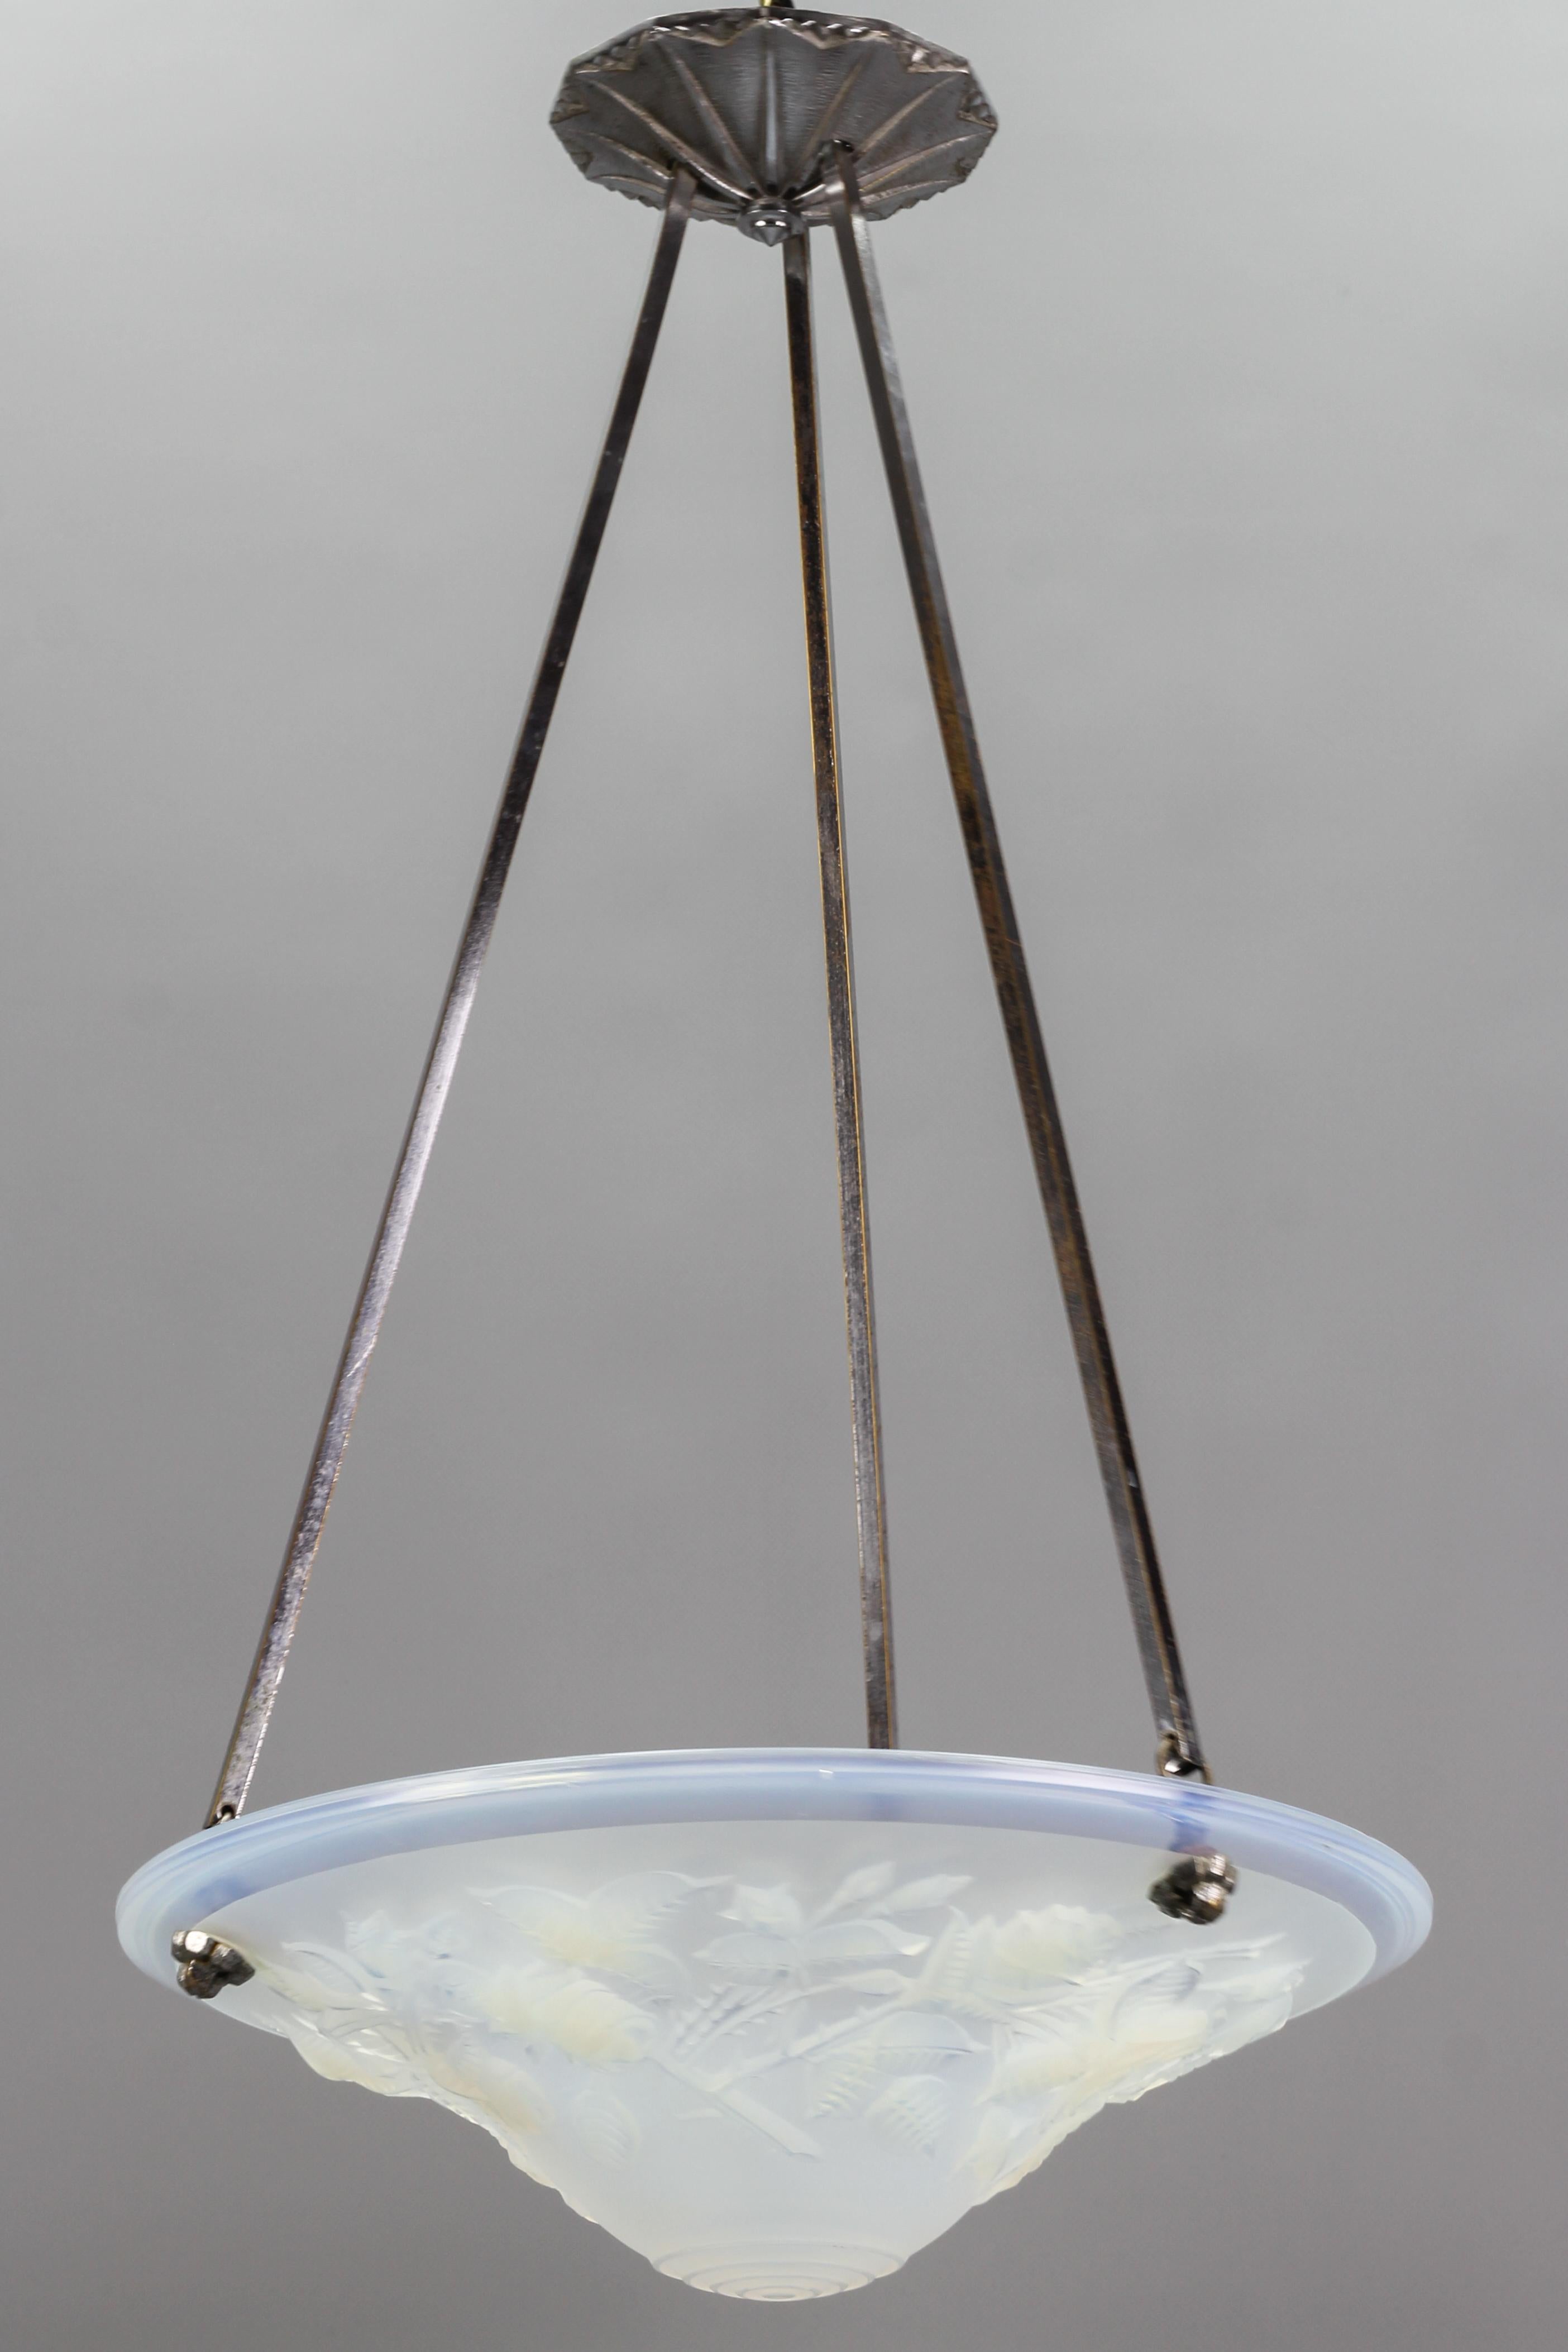 A beautiful French Art Deco pendant light made of adorable opalescent glass with a floral design – intricately detailed roses, leaves, and rosebuds. The opalescent glass bowl is signed ” P. Maynadier France”, hung at a chromed brass and bronze